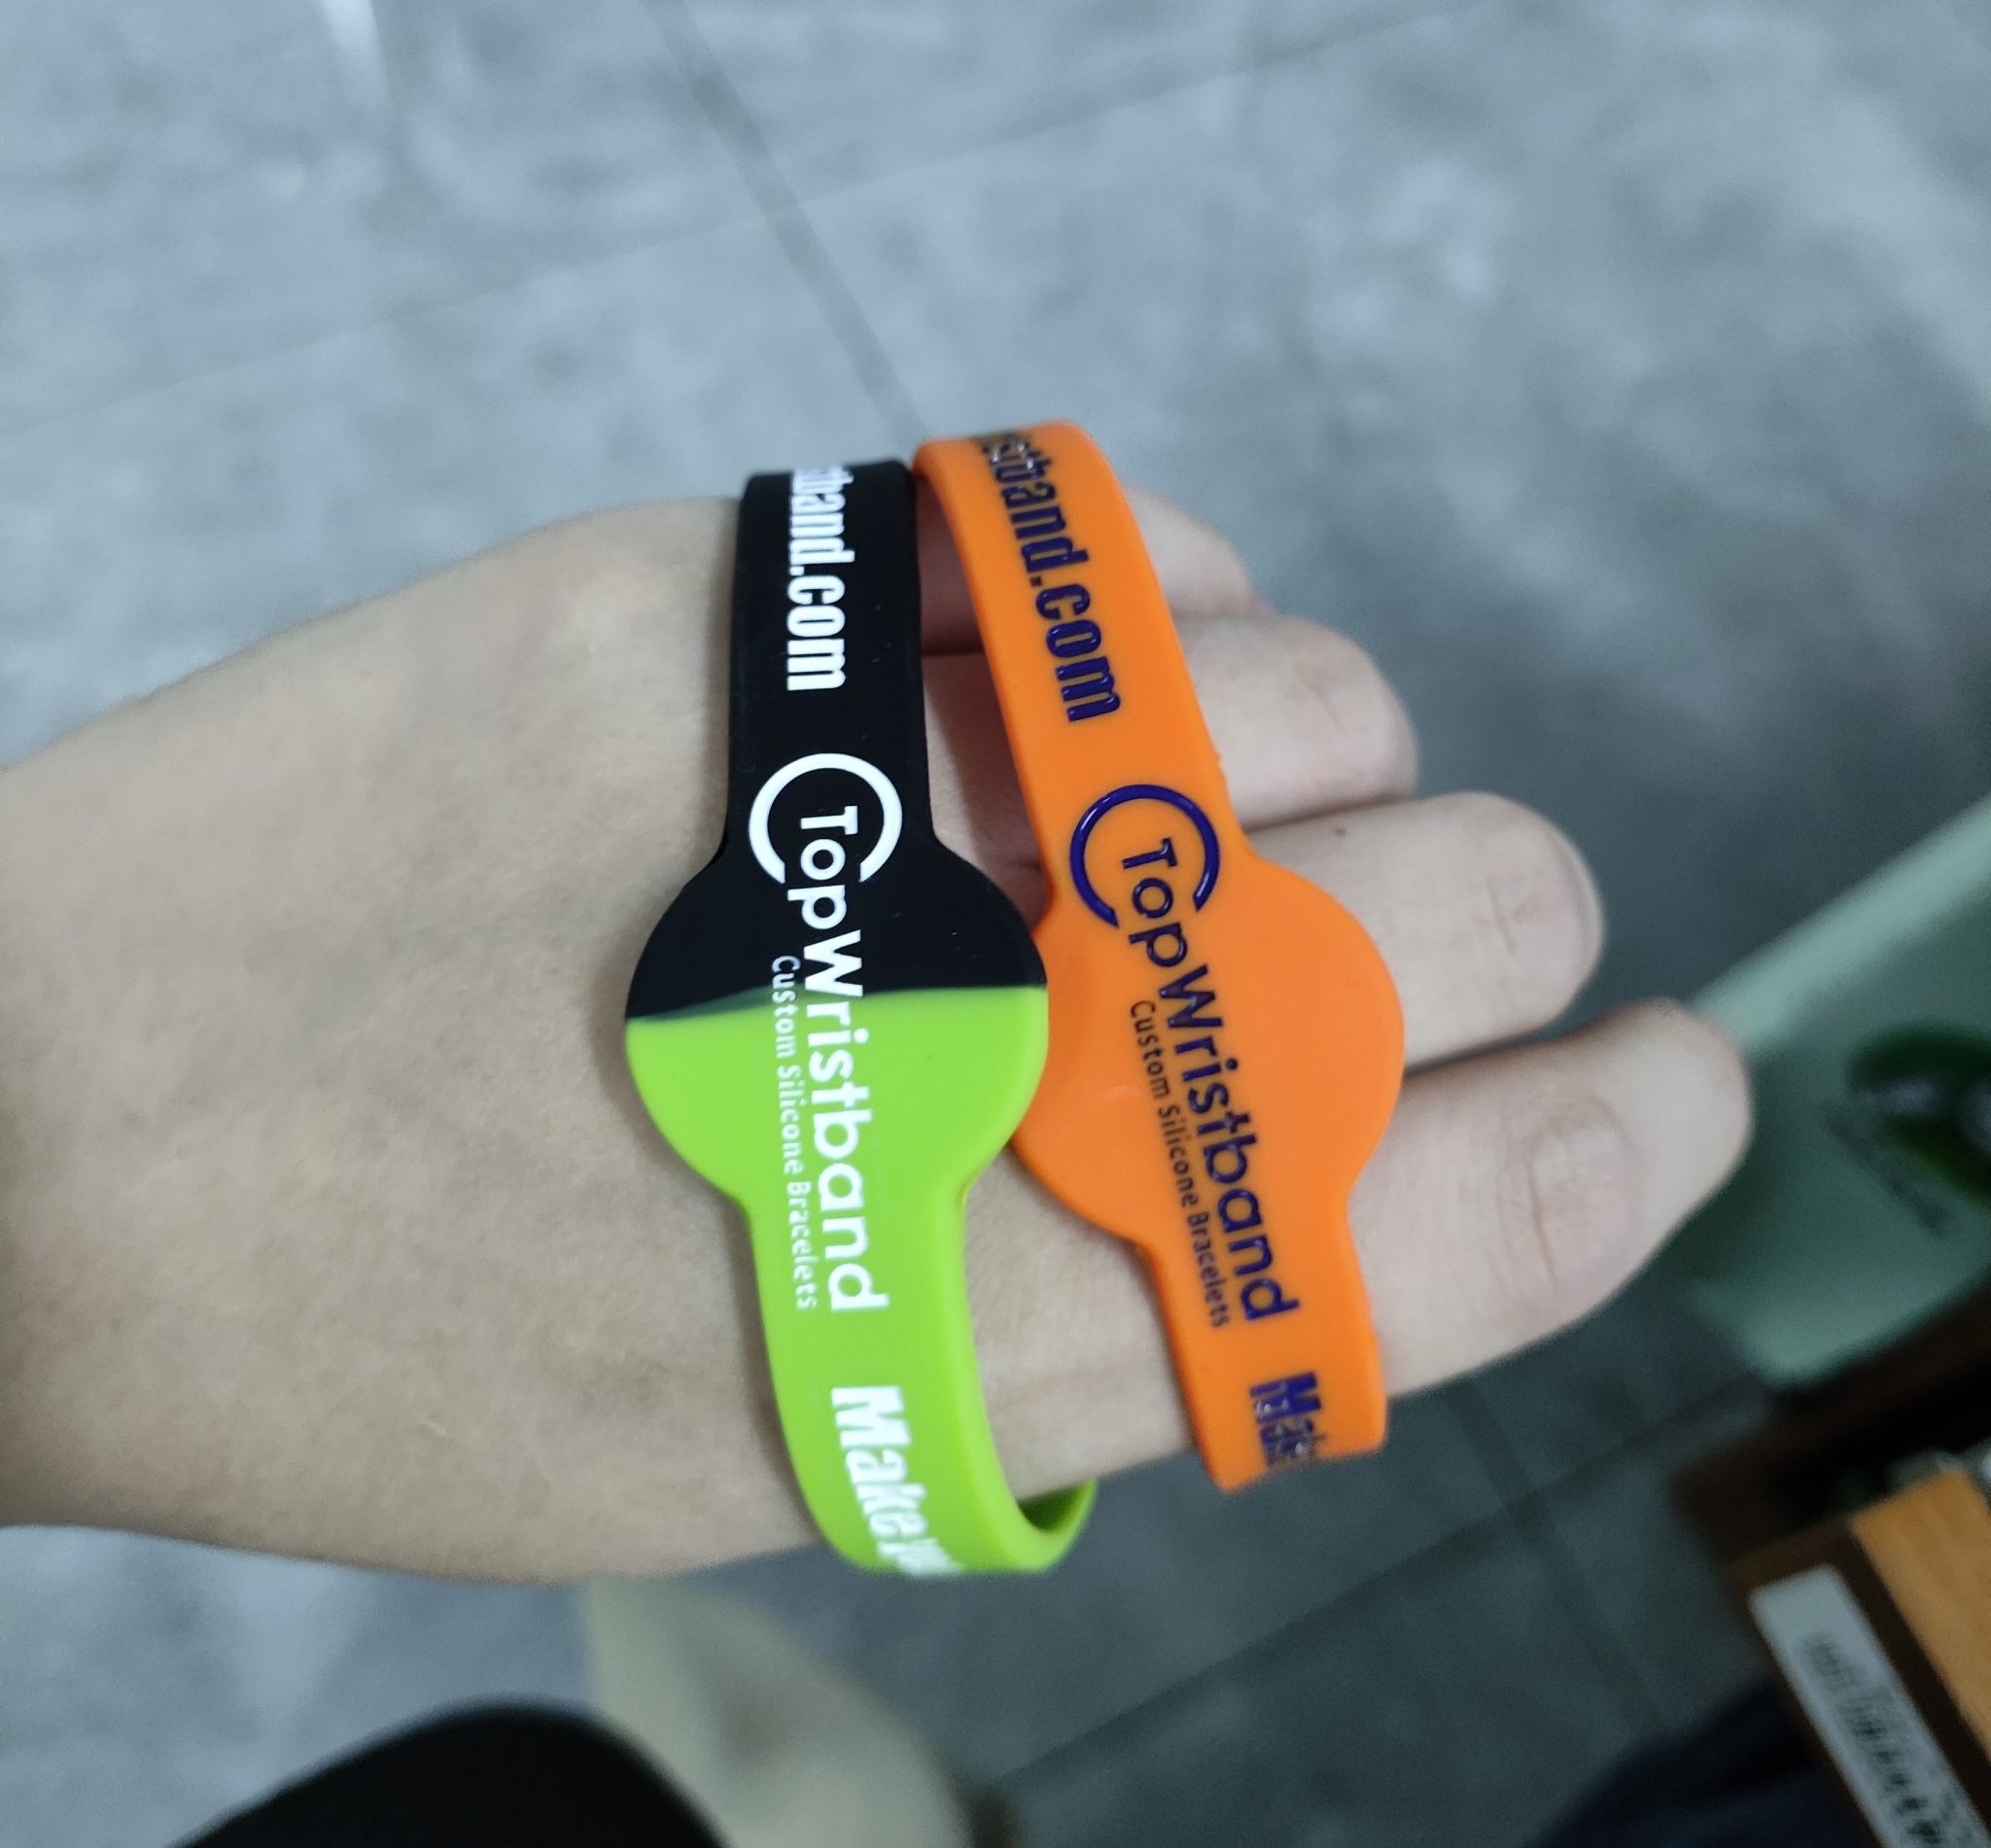 Music Festival Wristbands: “Music Lovers” – Capturing the Essence of Music 6